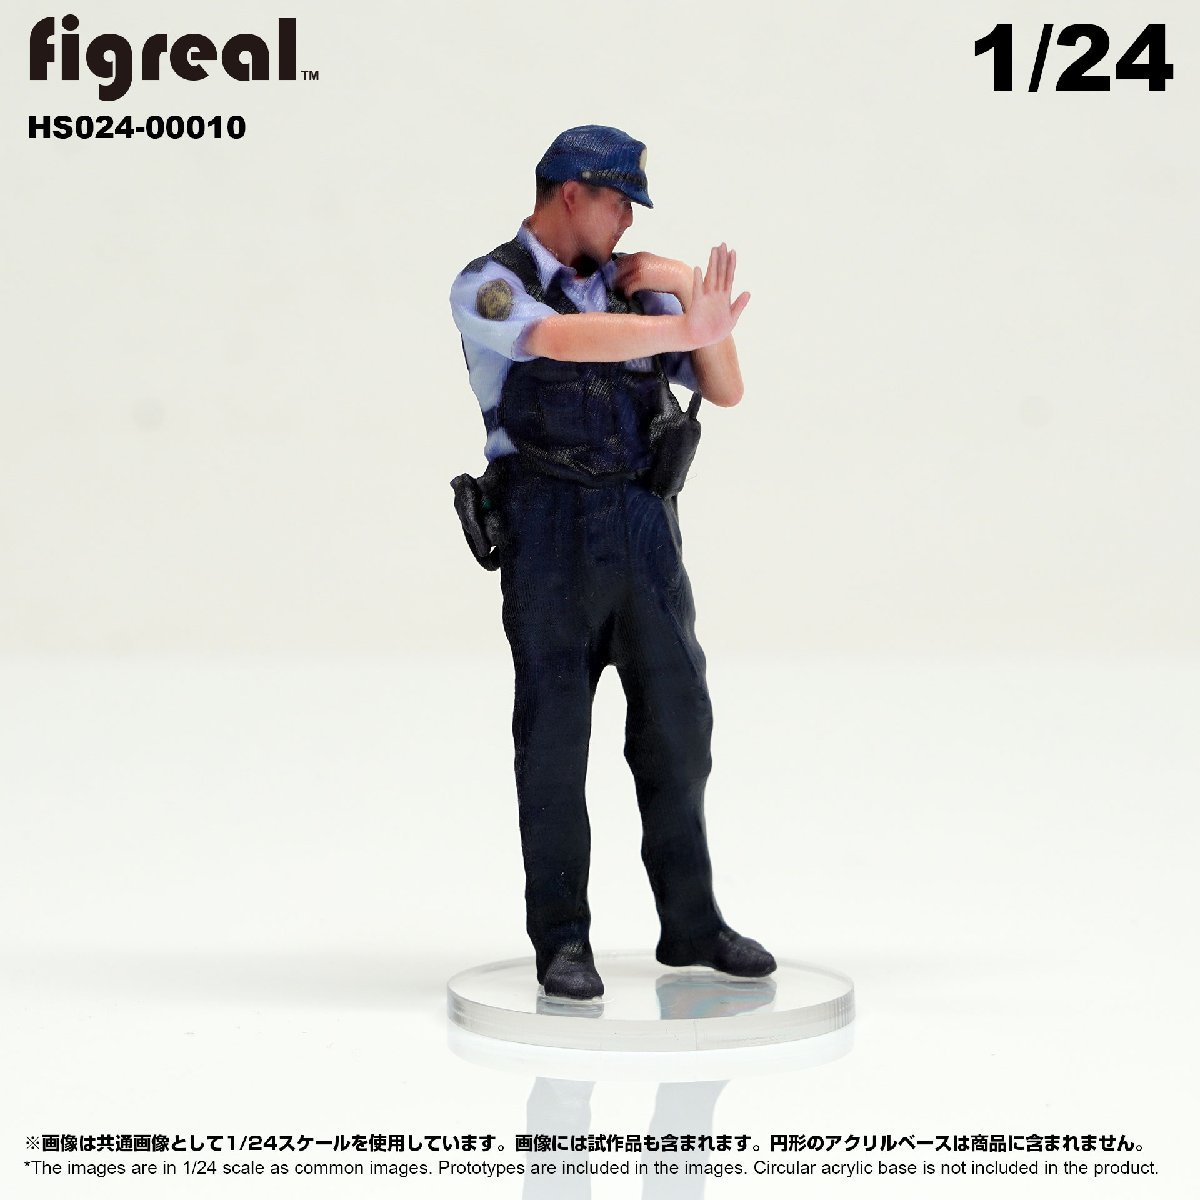 HS024-00010 figreal 日本警察官 1/24 高精細フィギュア_画像2